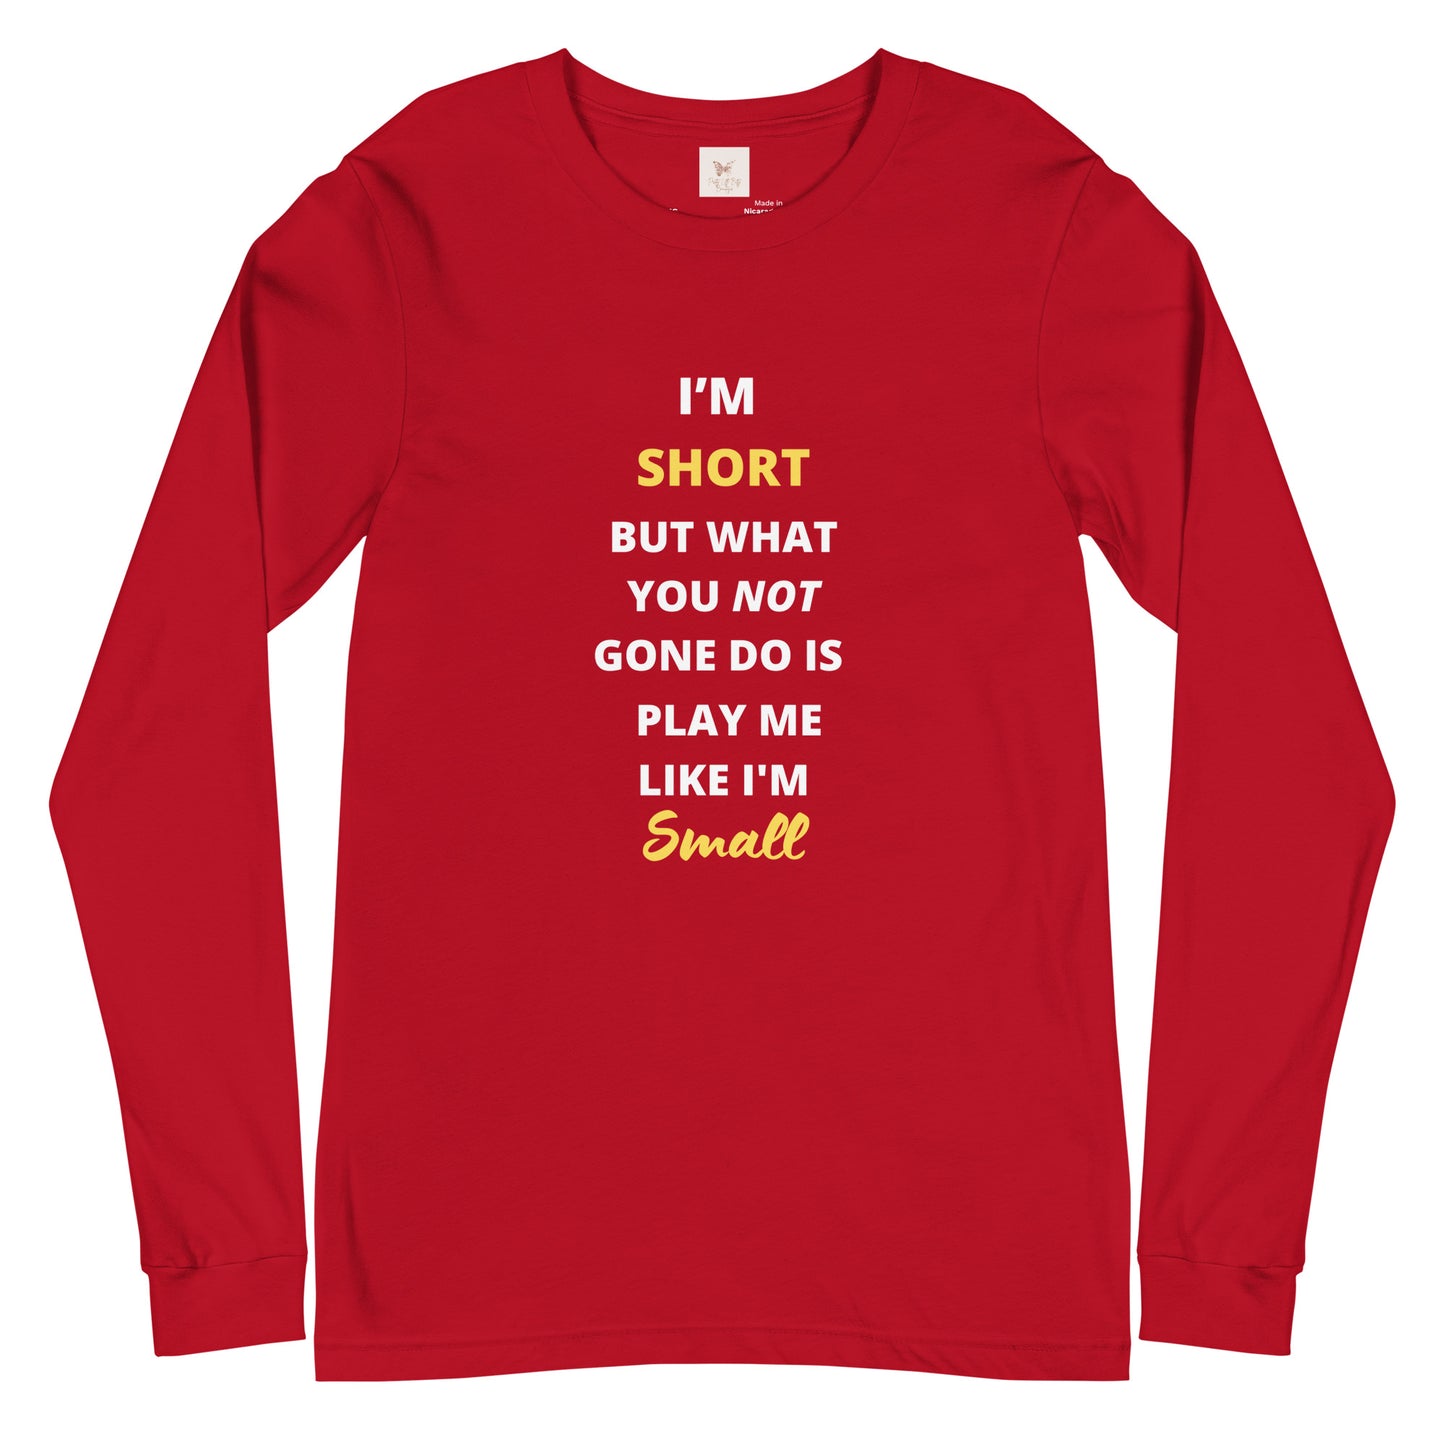 I May Be Short, But What You Not Gone Do Unisex Long Sleeve Tee